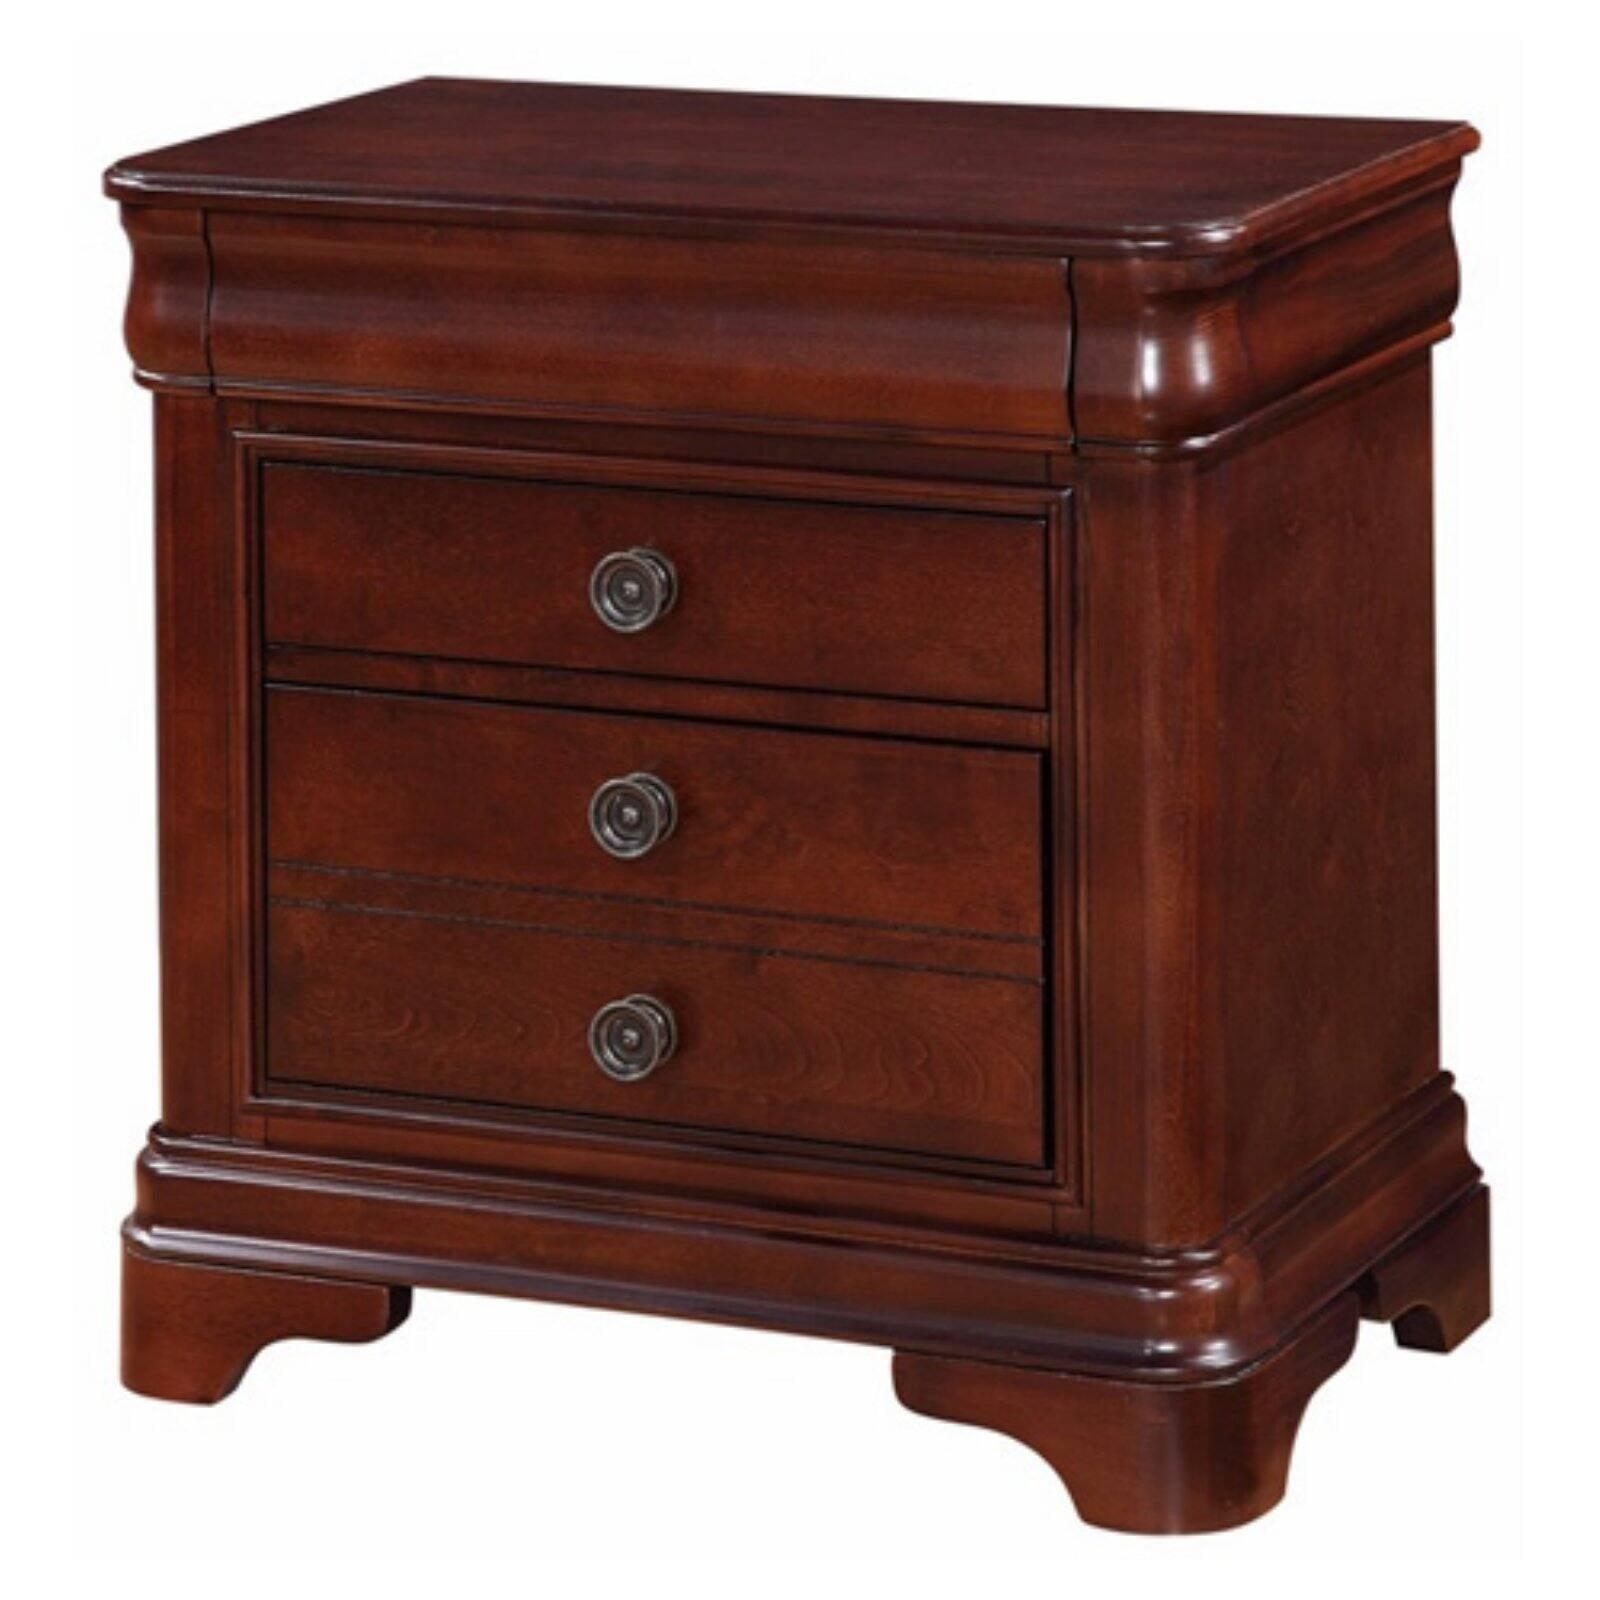 Traditional Cherry 3-Drawer Nightstand with Hidden Storage